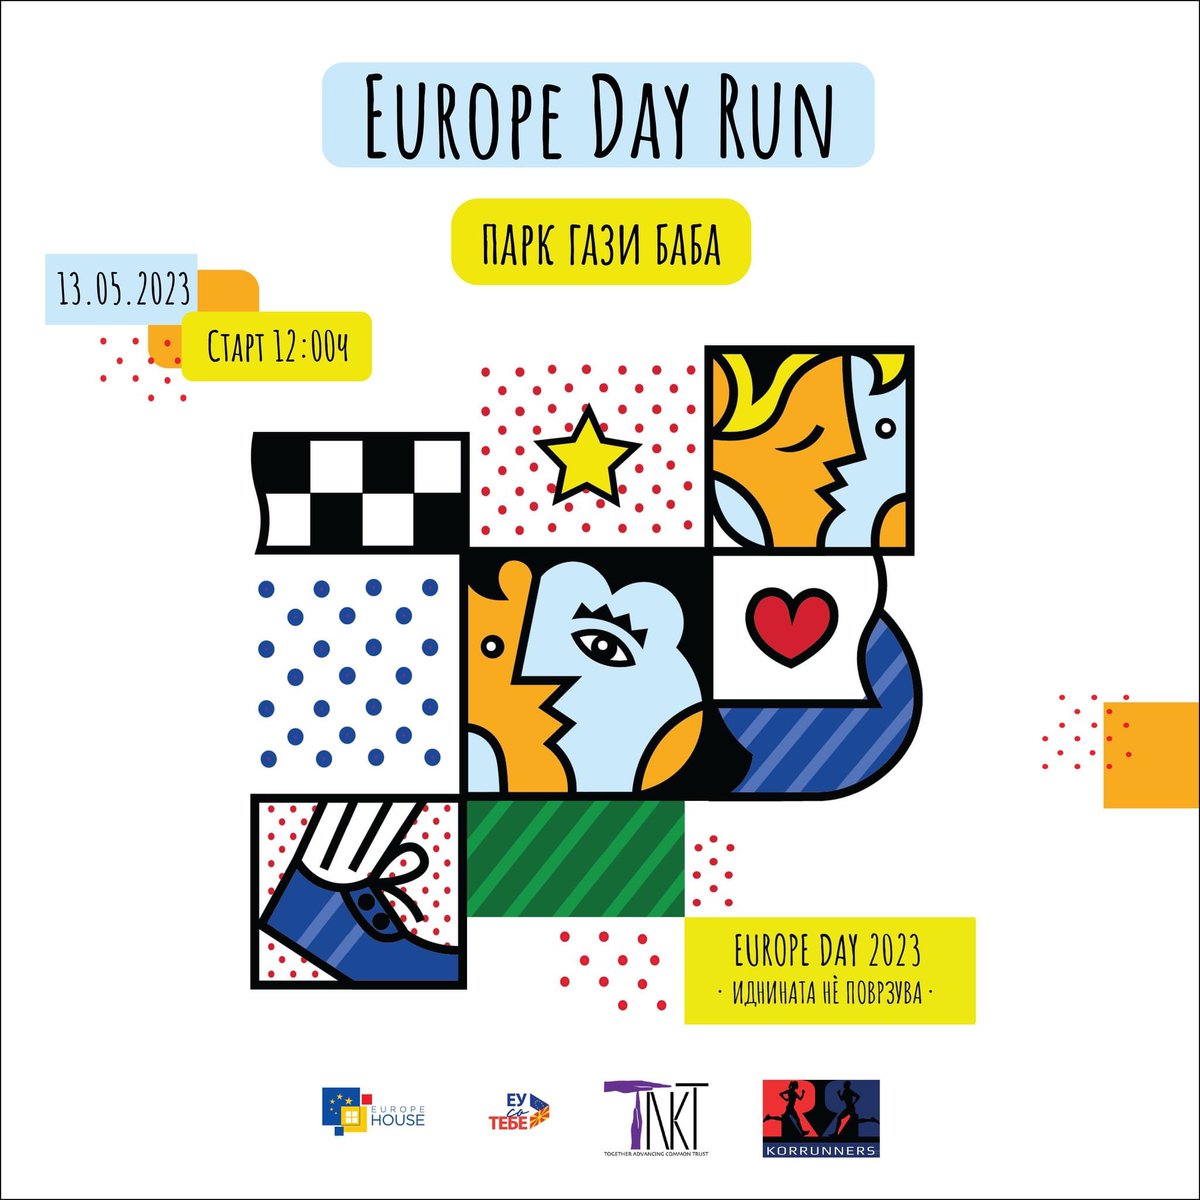 More than 💯 runners 🏃‍♀️ registered for the #Europedayrun in two days. Registration closed with love ❤️ #europehouseskopje #EuropeDay2023